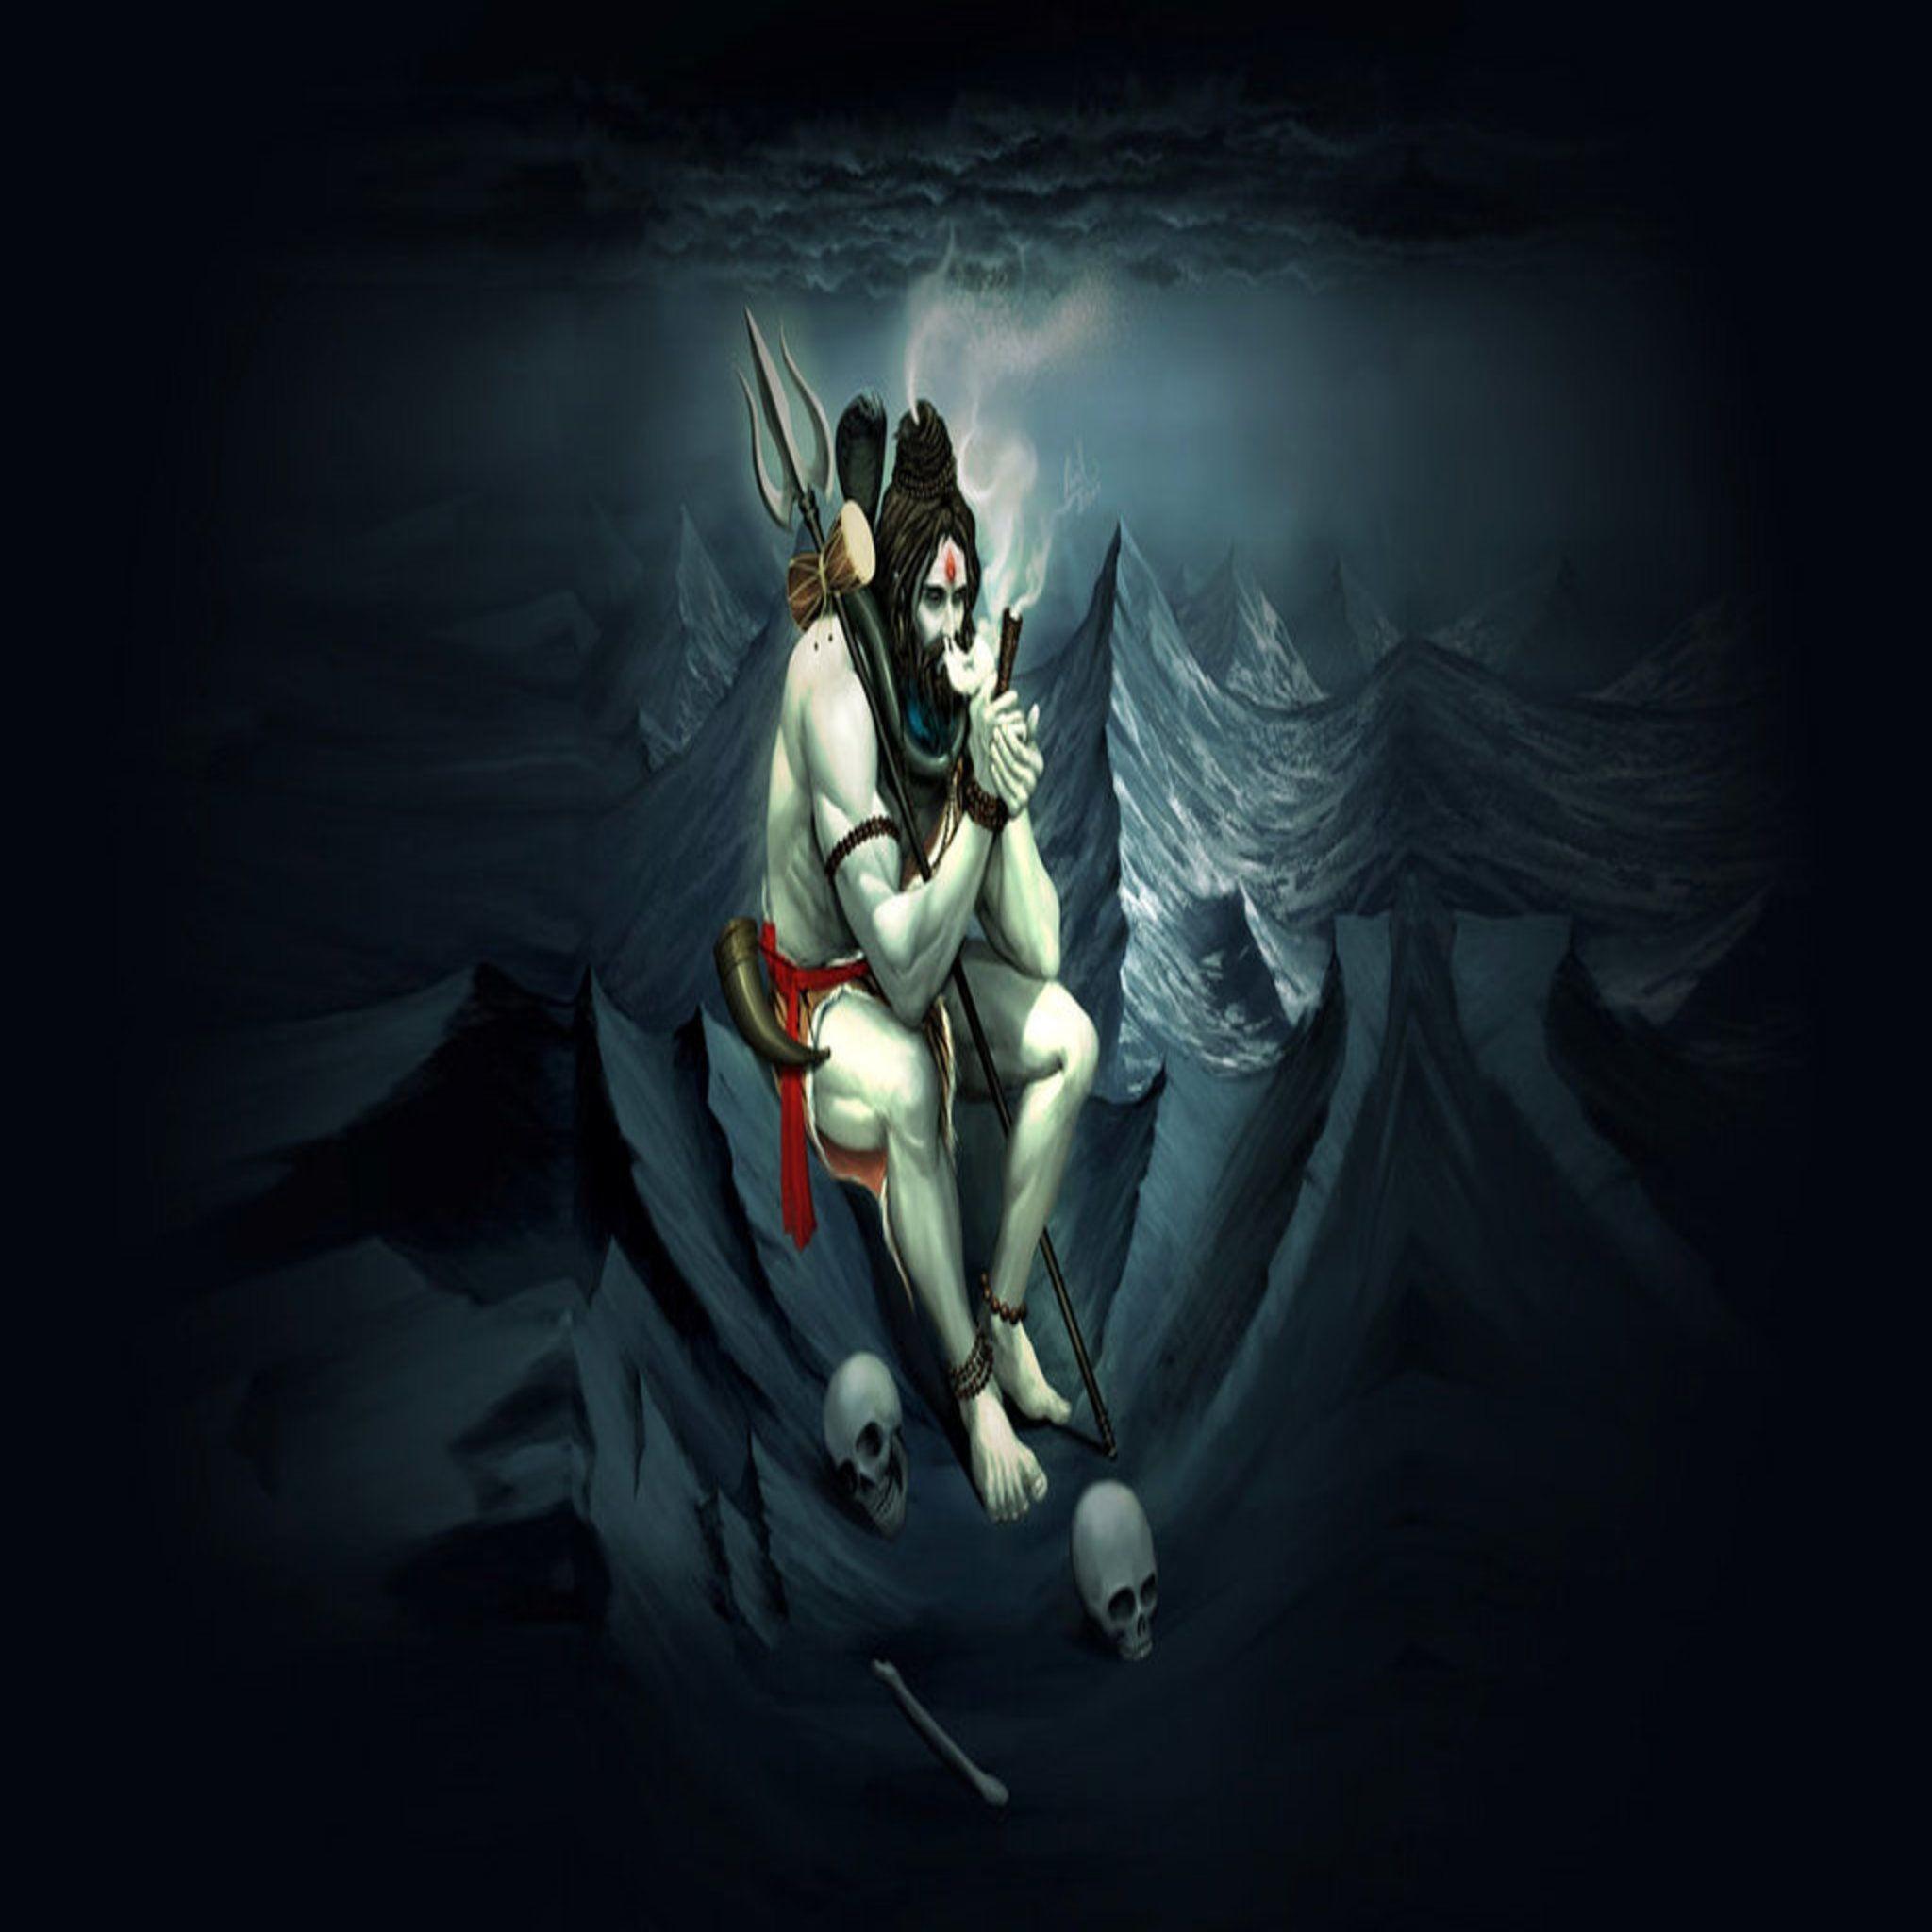 Hd Image Of Lord Shiva In Anger